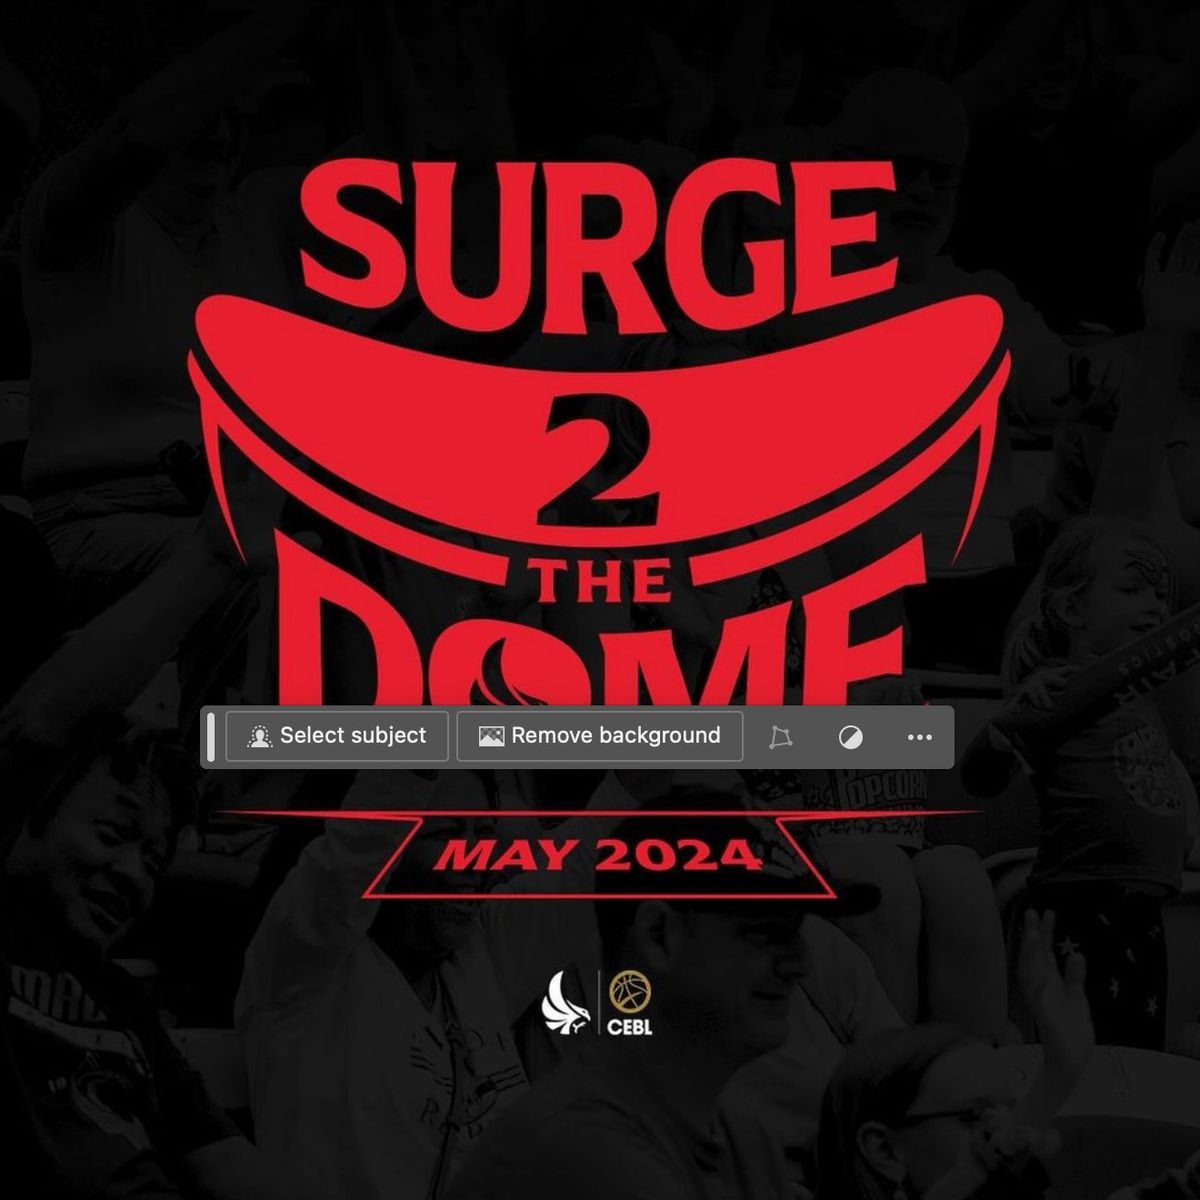 Join your Down syndrome friends and family at the Surge 2 the Dome game